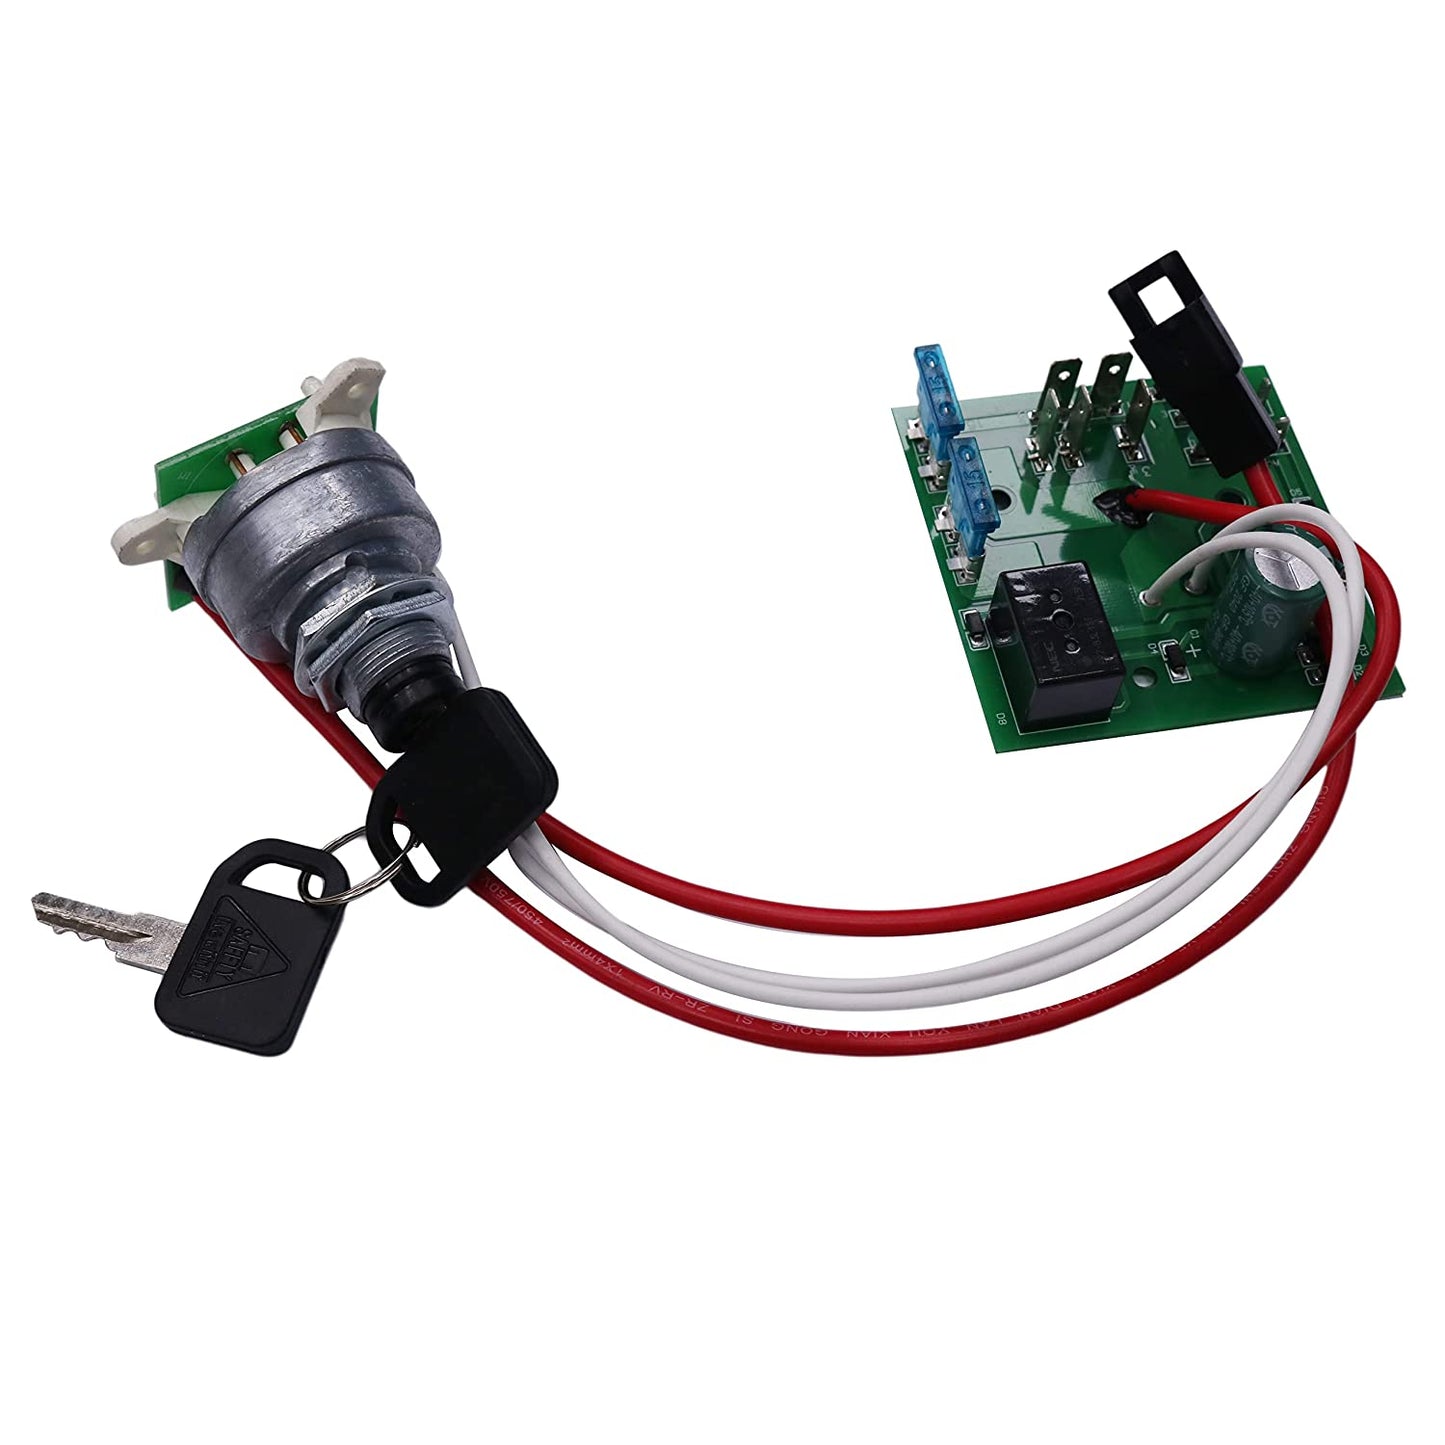 New AM122913 Ignition Switch Module with 2 Umbrella Keys Compatible with John Deere Tractor 345 325 335 Serial Number-070000